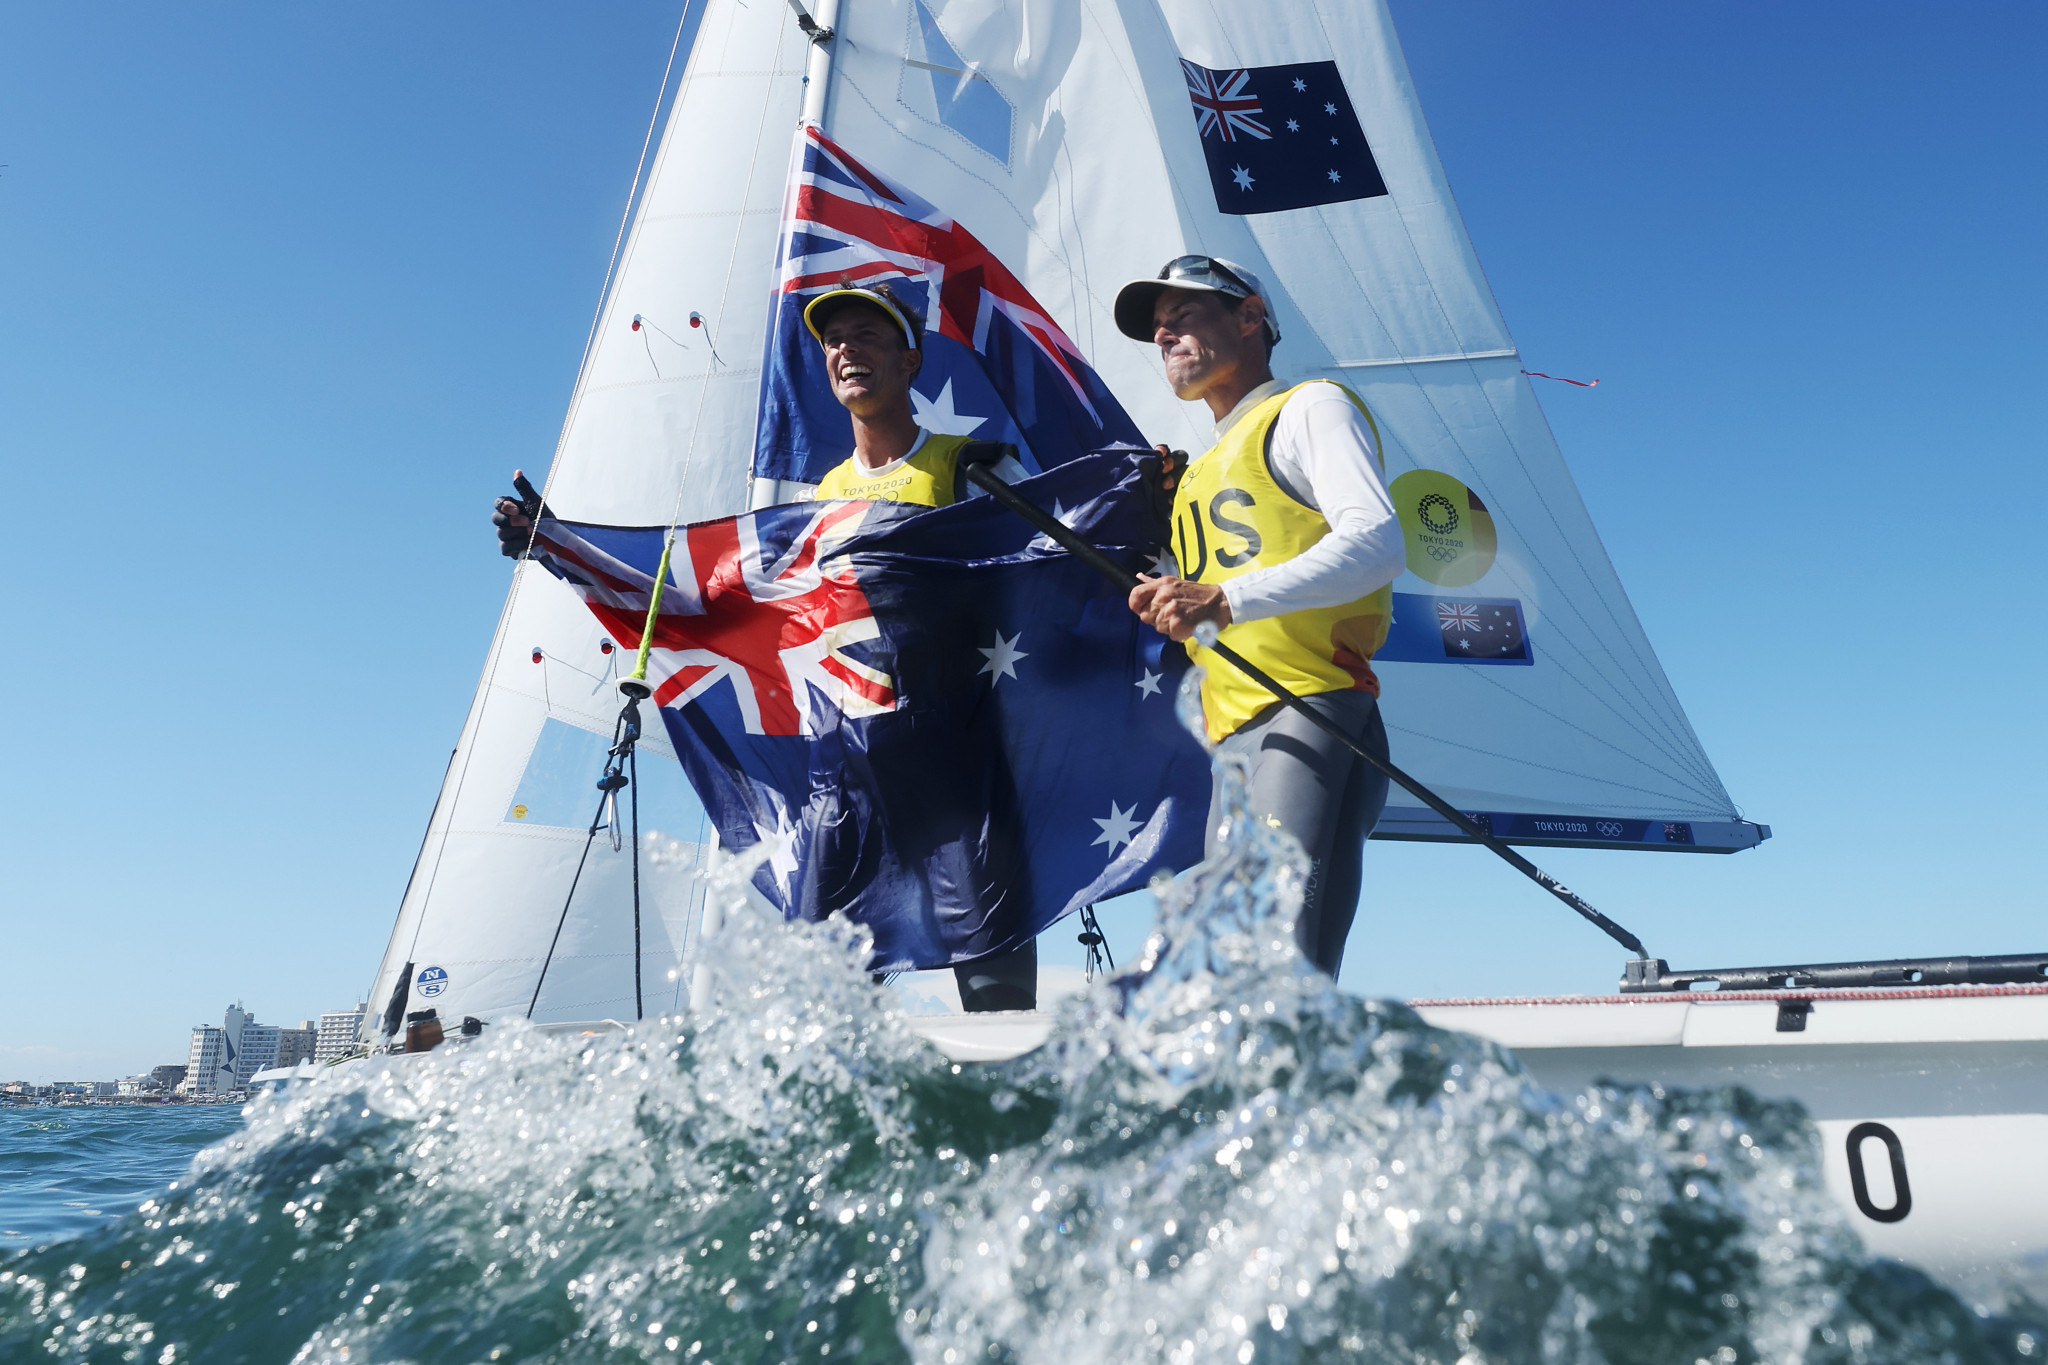 Australia's Mat Belcher and Will Ryan won the men's 470 gold ©Getty Images